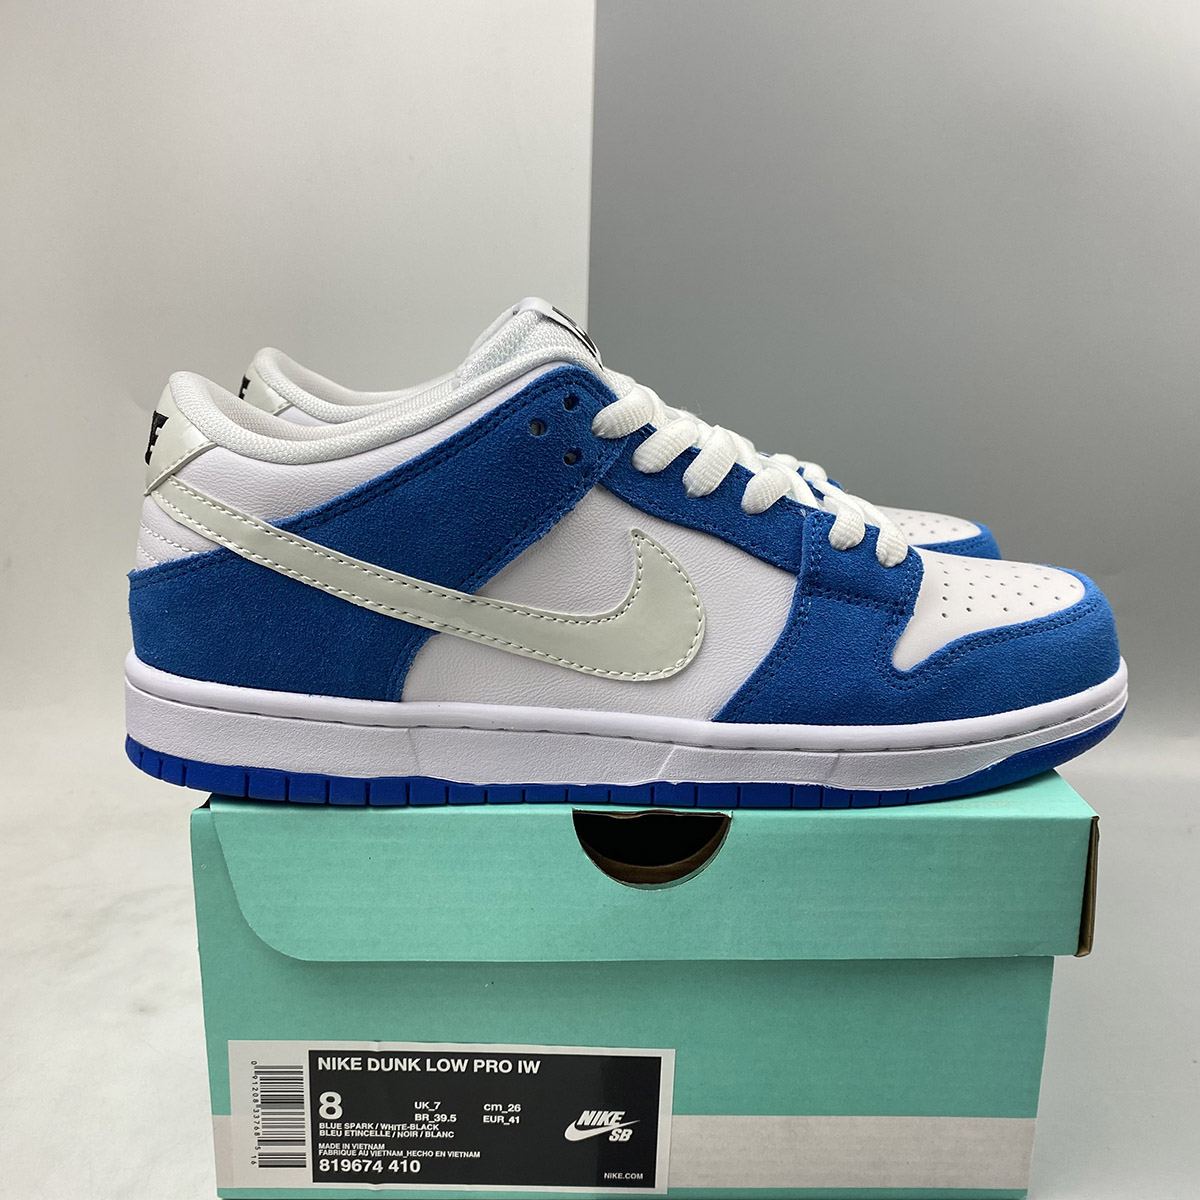 Ishod Wair x Nike SB Dunk Low Pro Blue Spark/White-Black For Sale – The ...